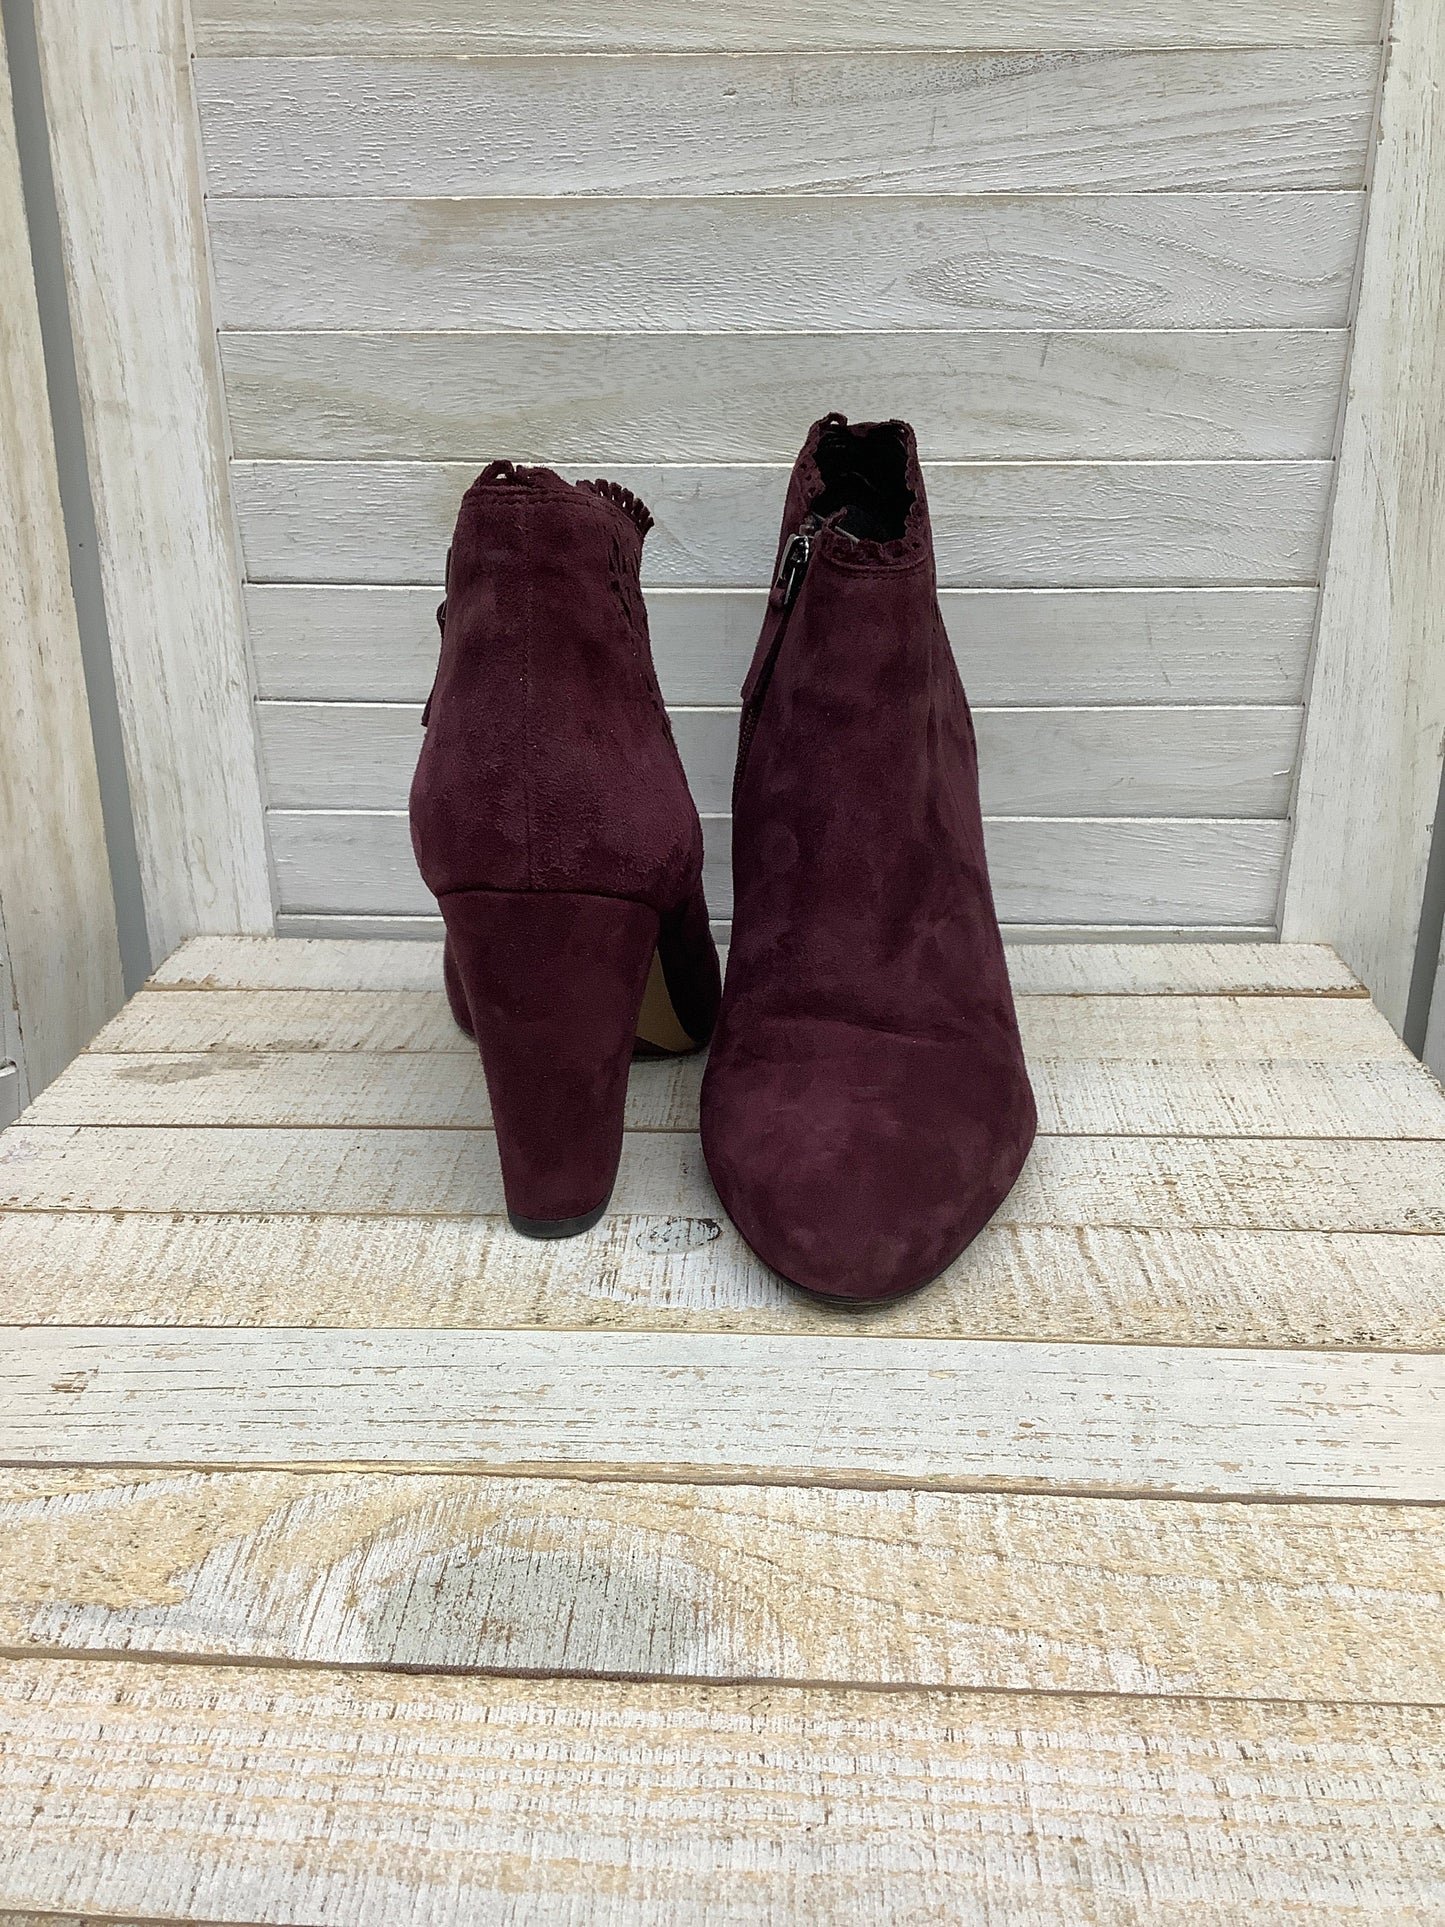 Boots Ankle Heels By Franco Sarto  Size: 8.5